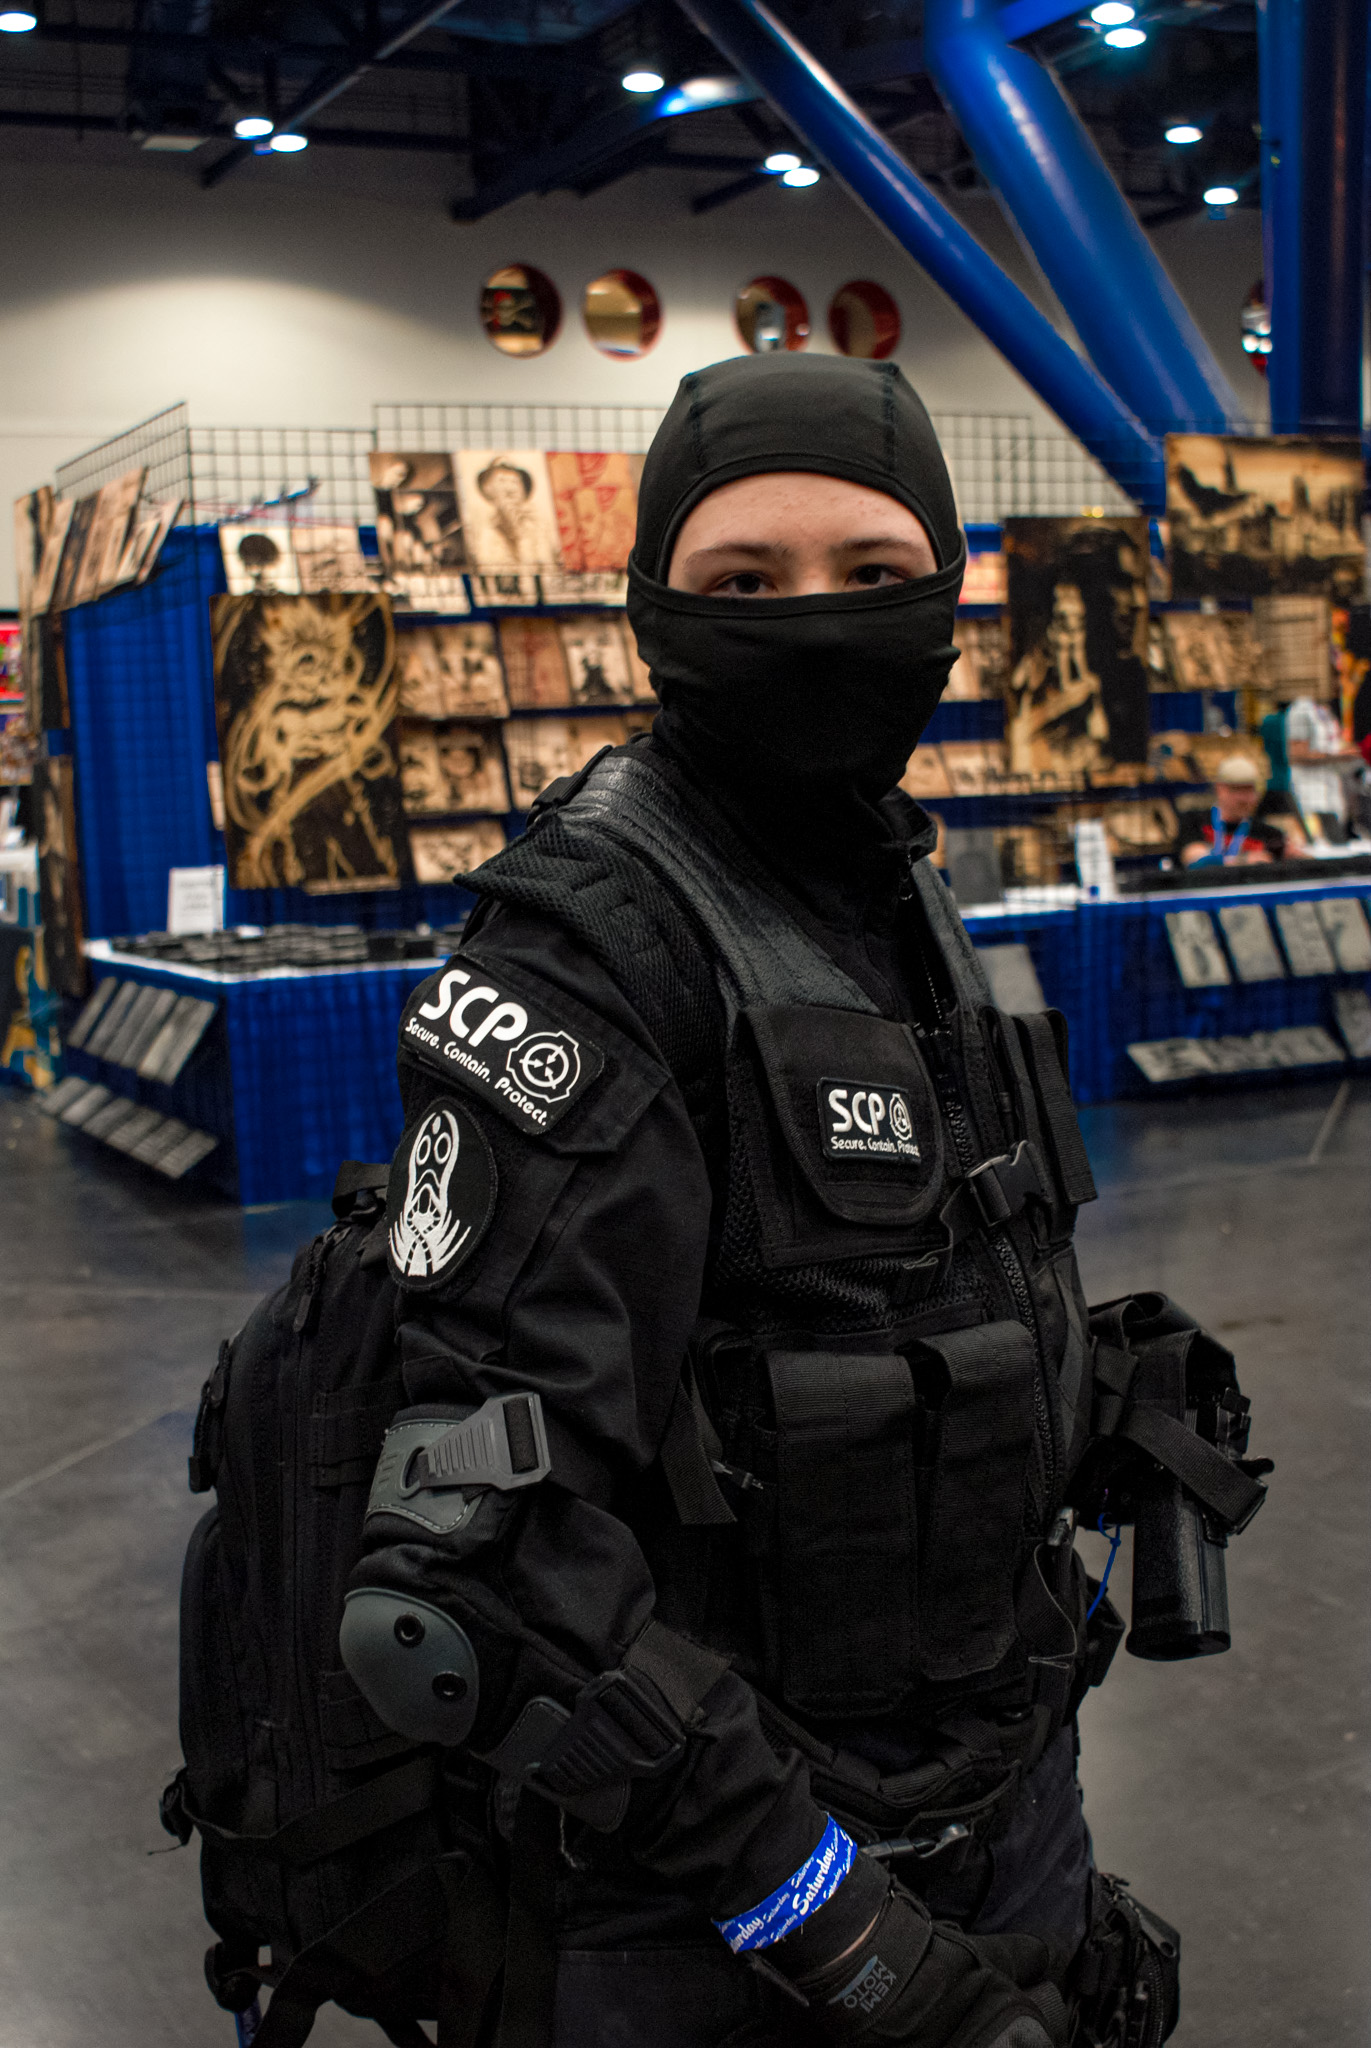 Chris is cosplaying as a member of the mobile task force Zeta-9 (Mole Rats) from the online wiki SCP foundation. This was Chris second year coming to Comicpalooza, he told this cosplay took him two months to make and the harder parts to come by were the vest. Photo by reporter Adan Martinez.